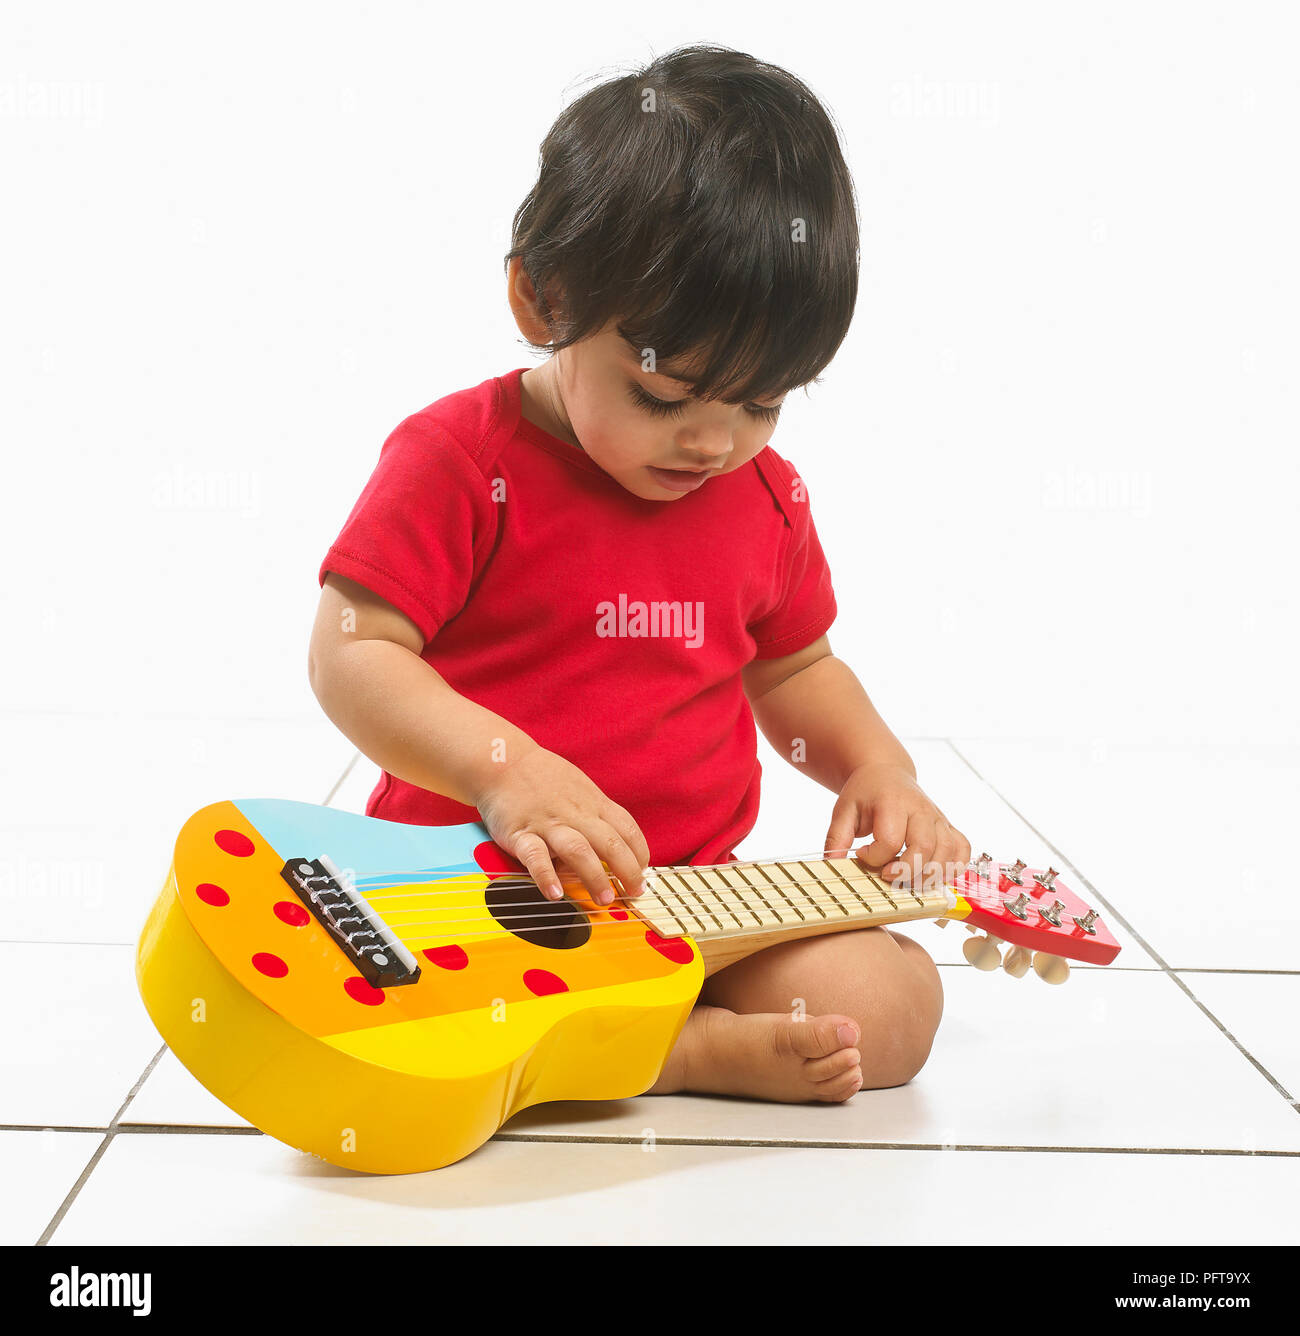 Baby boy (16 months) sitting holding colourful children's guitar Stock Photo